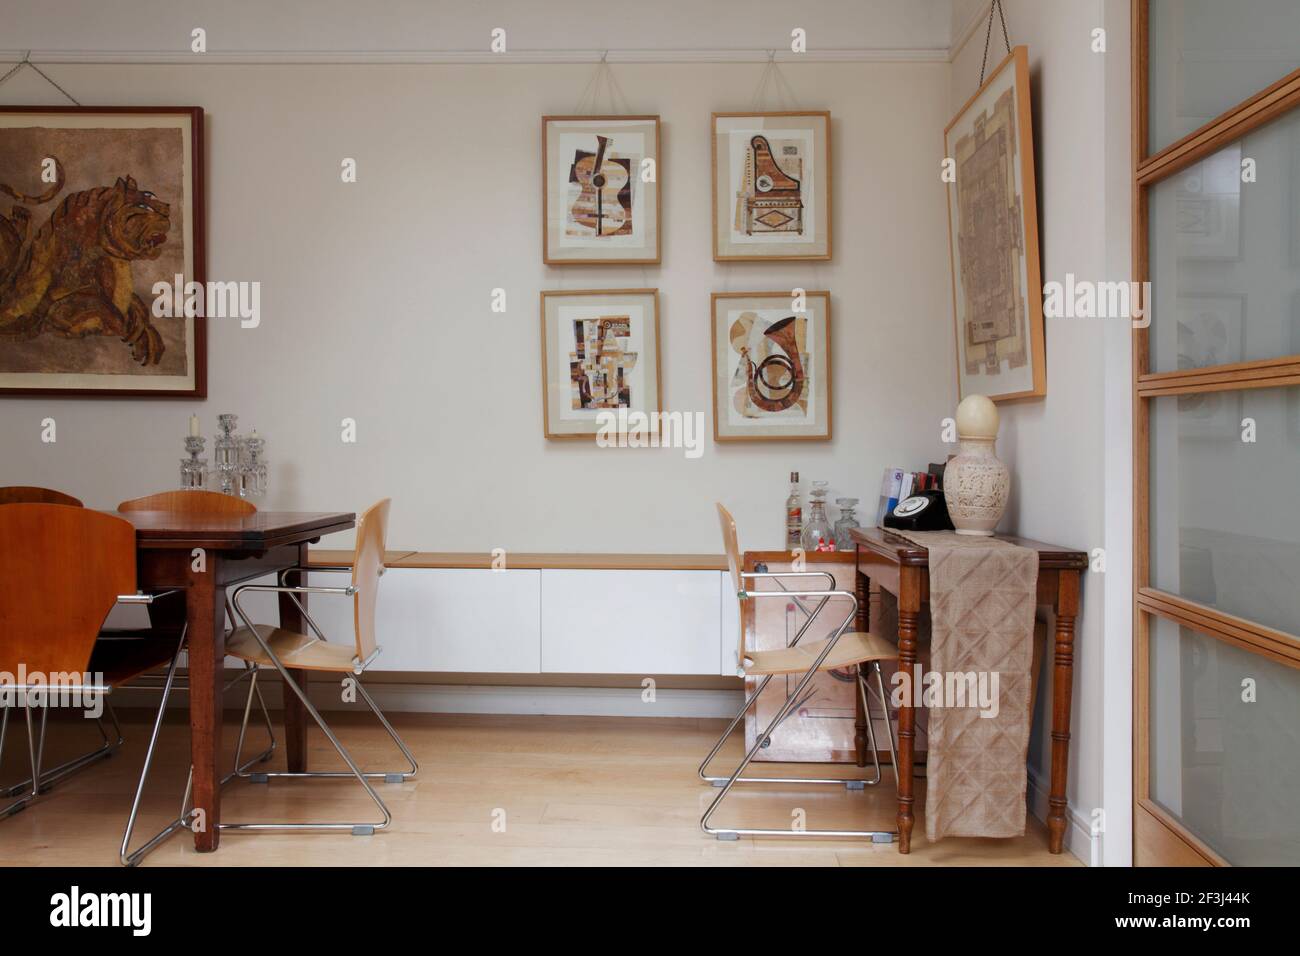 Desk in corner of dining area | Architect: Silk Mews Architects | Stock Photo